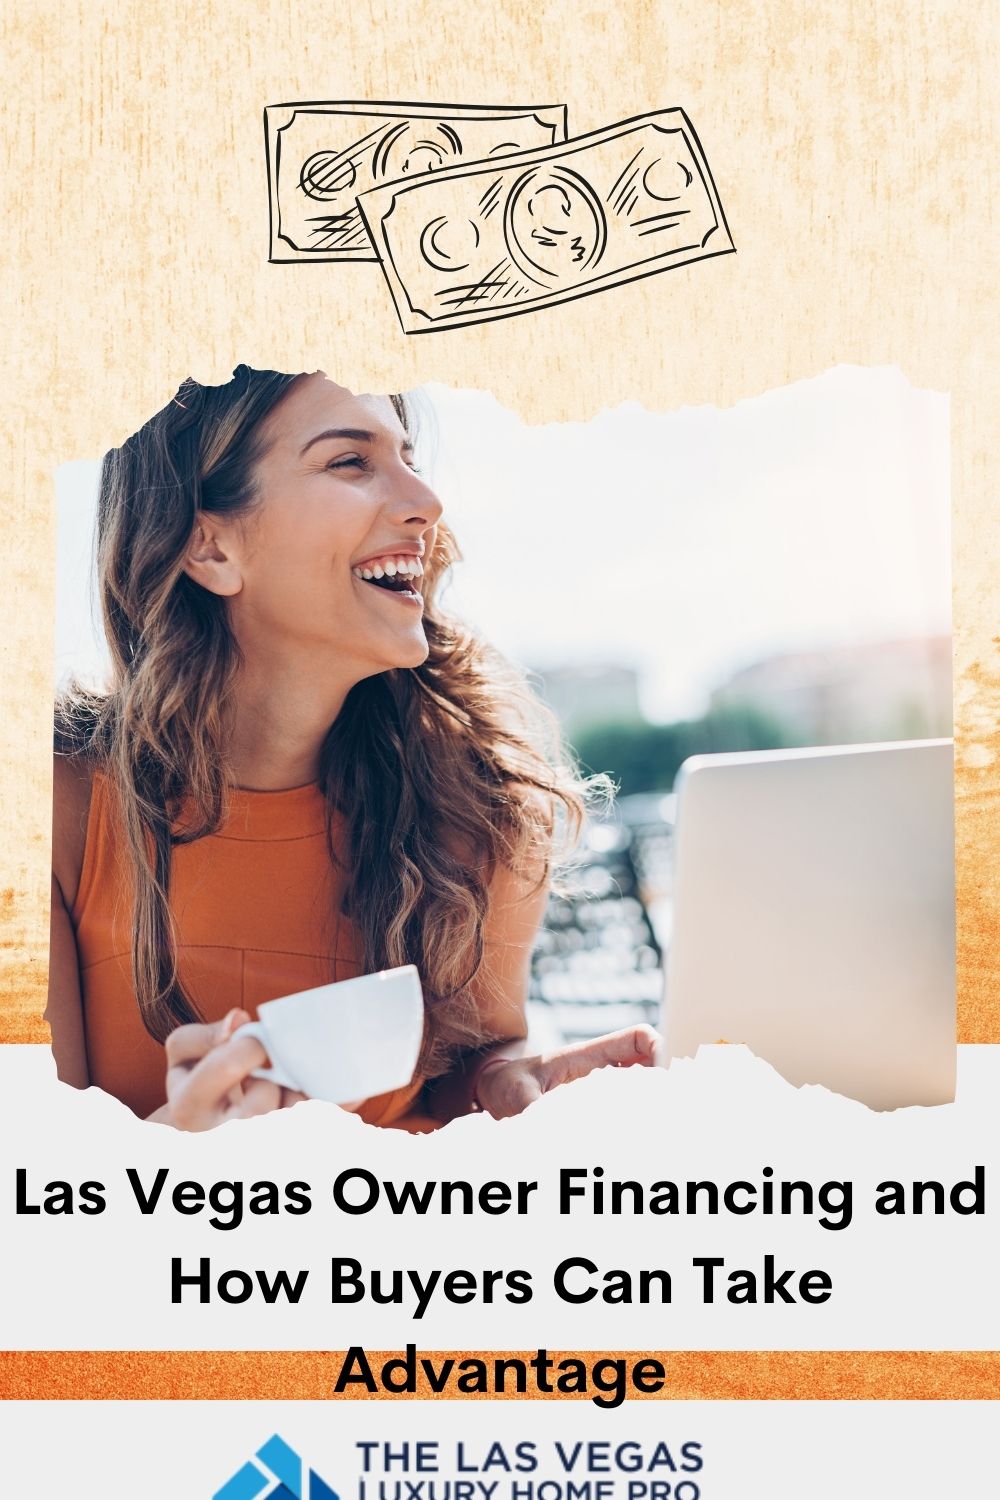 Las Vegas Owner Financing and How Buyers Can Take Advantage